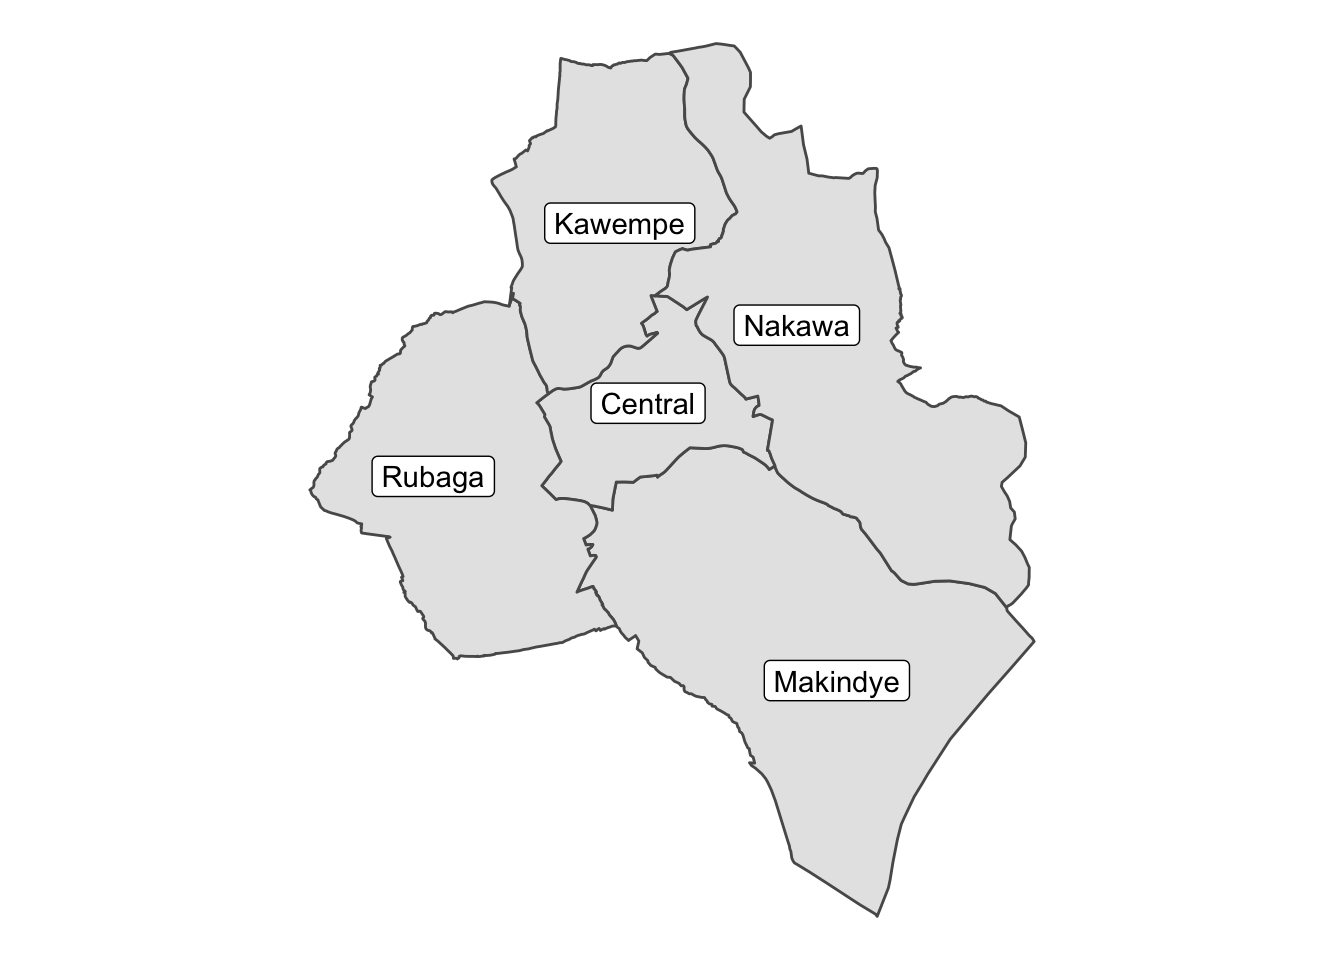 A grey outline of Kampala and borders of its five regions, shaded light grey. Each region has a rounded white box with the name of the region as a label inside.